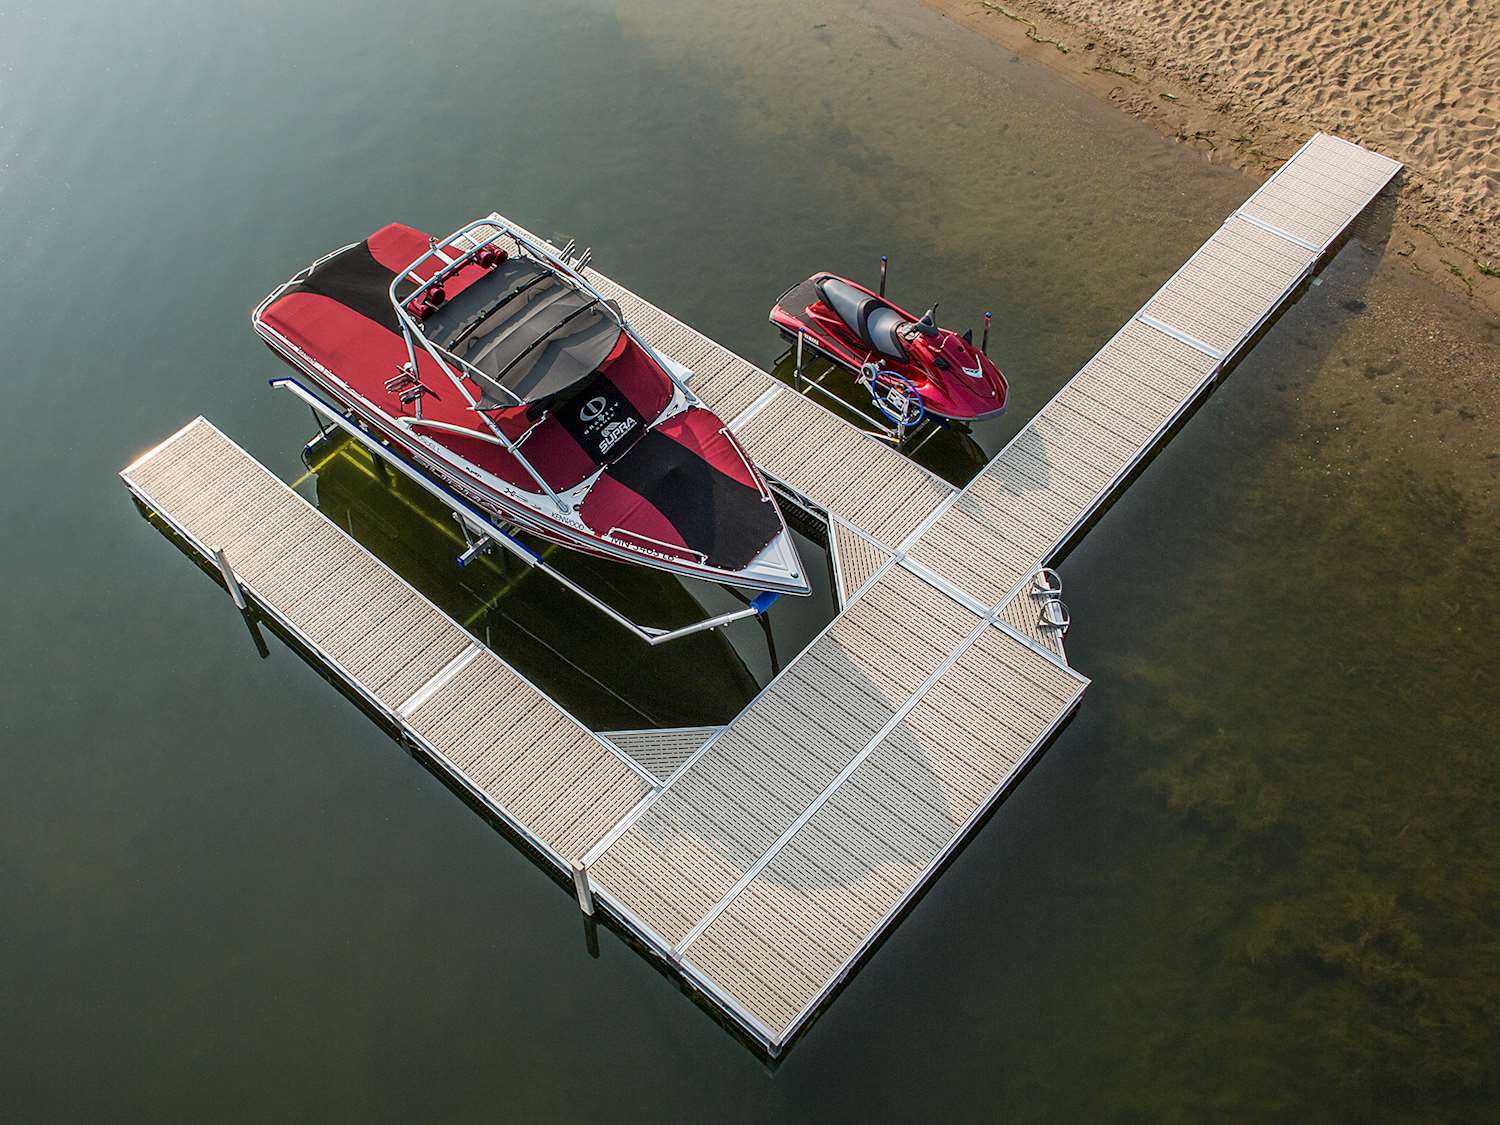 Lift and dock installation in Sylvan Lake and surrounding area. We carry Shoremaster waterfront systems and lifts. Contact us for dock installs or removal.